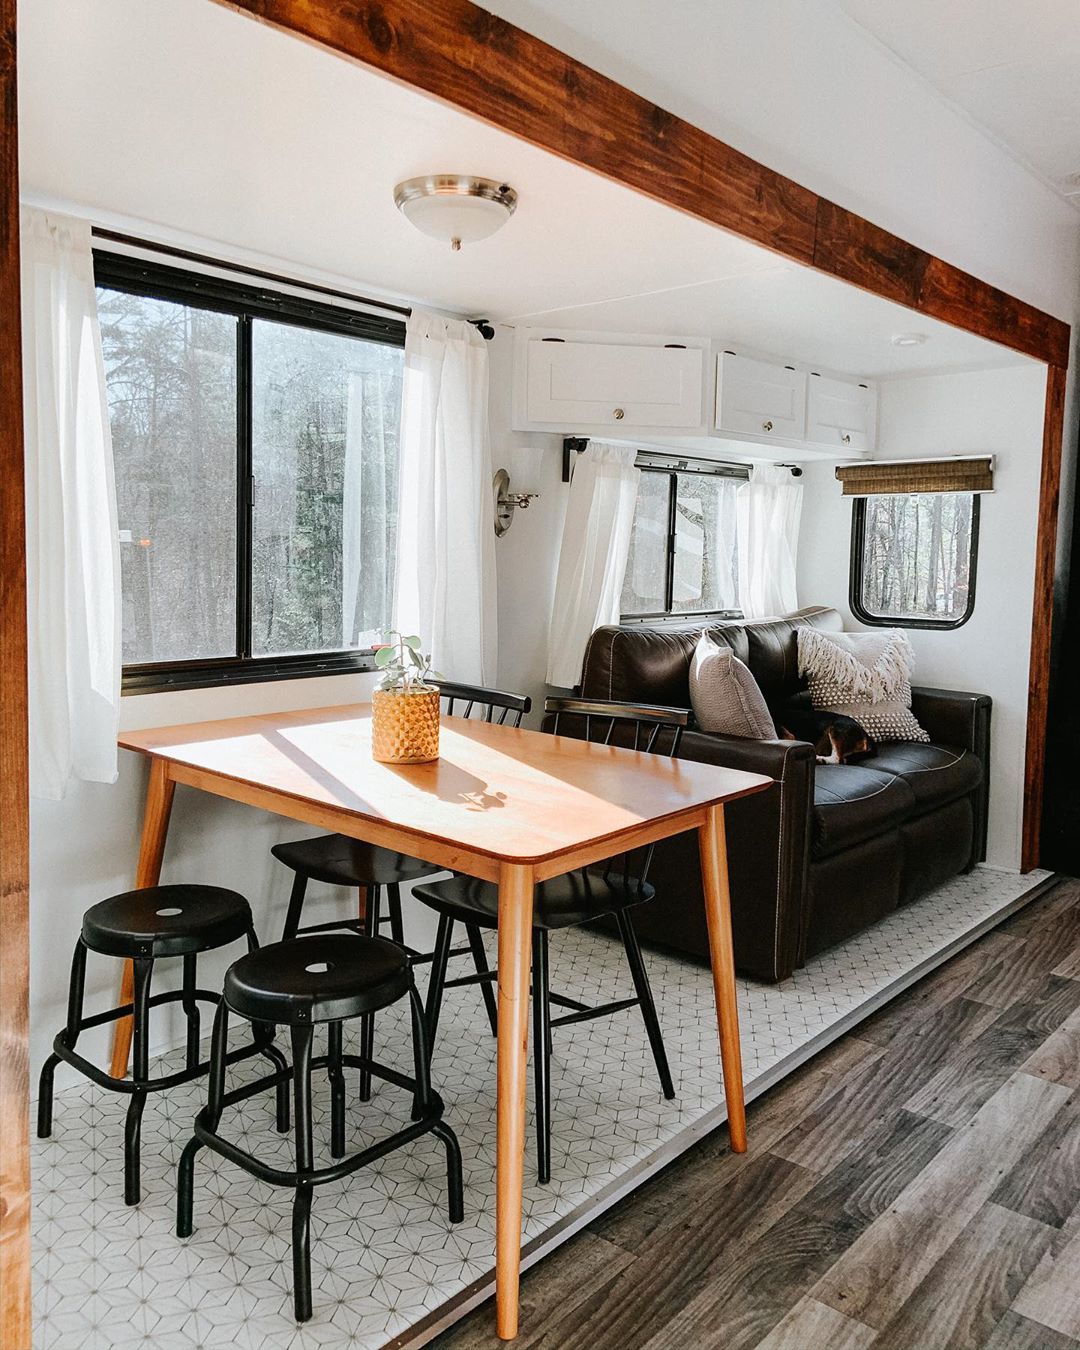 updated windows in new RV with dining table photo by Instagram user @choosing.less